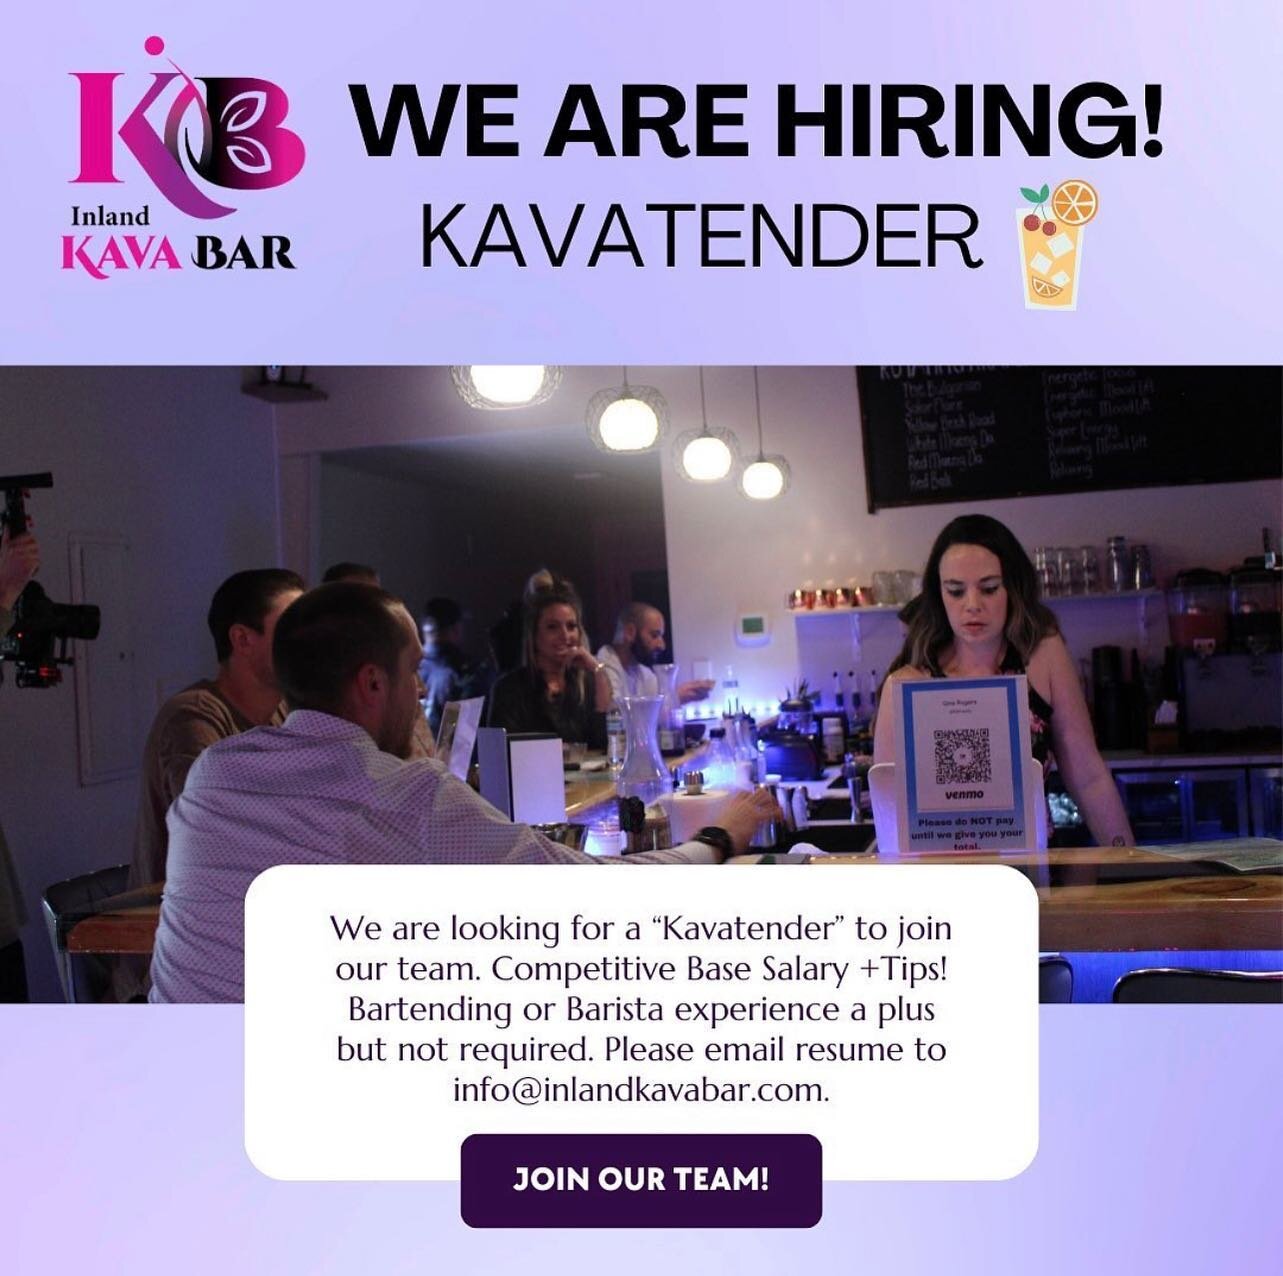 We are hiring another Kavatender for our incredible Inland Kava Bar team! 🍹If you think you would be a great fit please email or drop off your resume in store. We would love to meet you! If you know a great fit for us please tag in the comments. 😉
